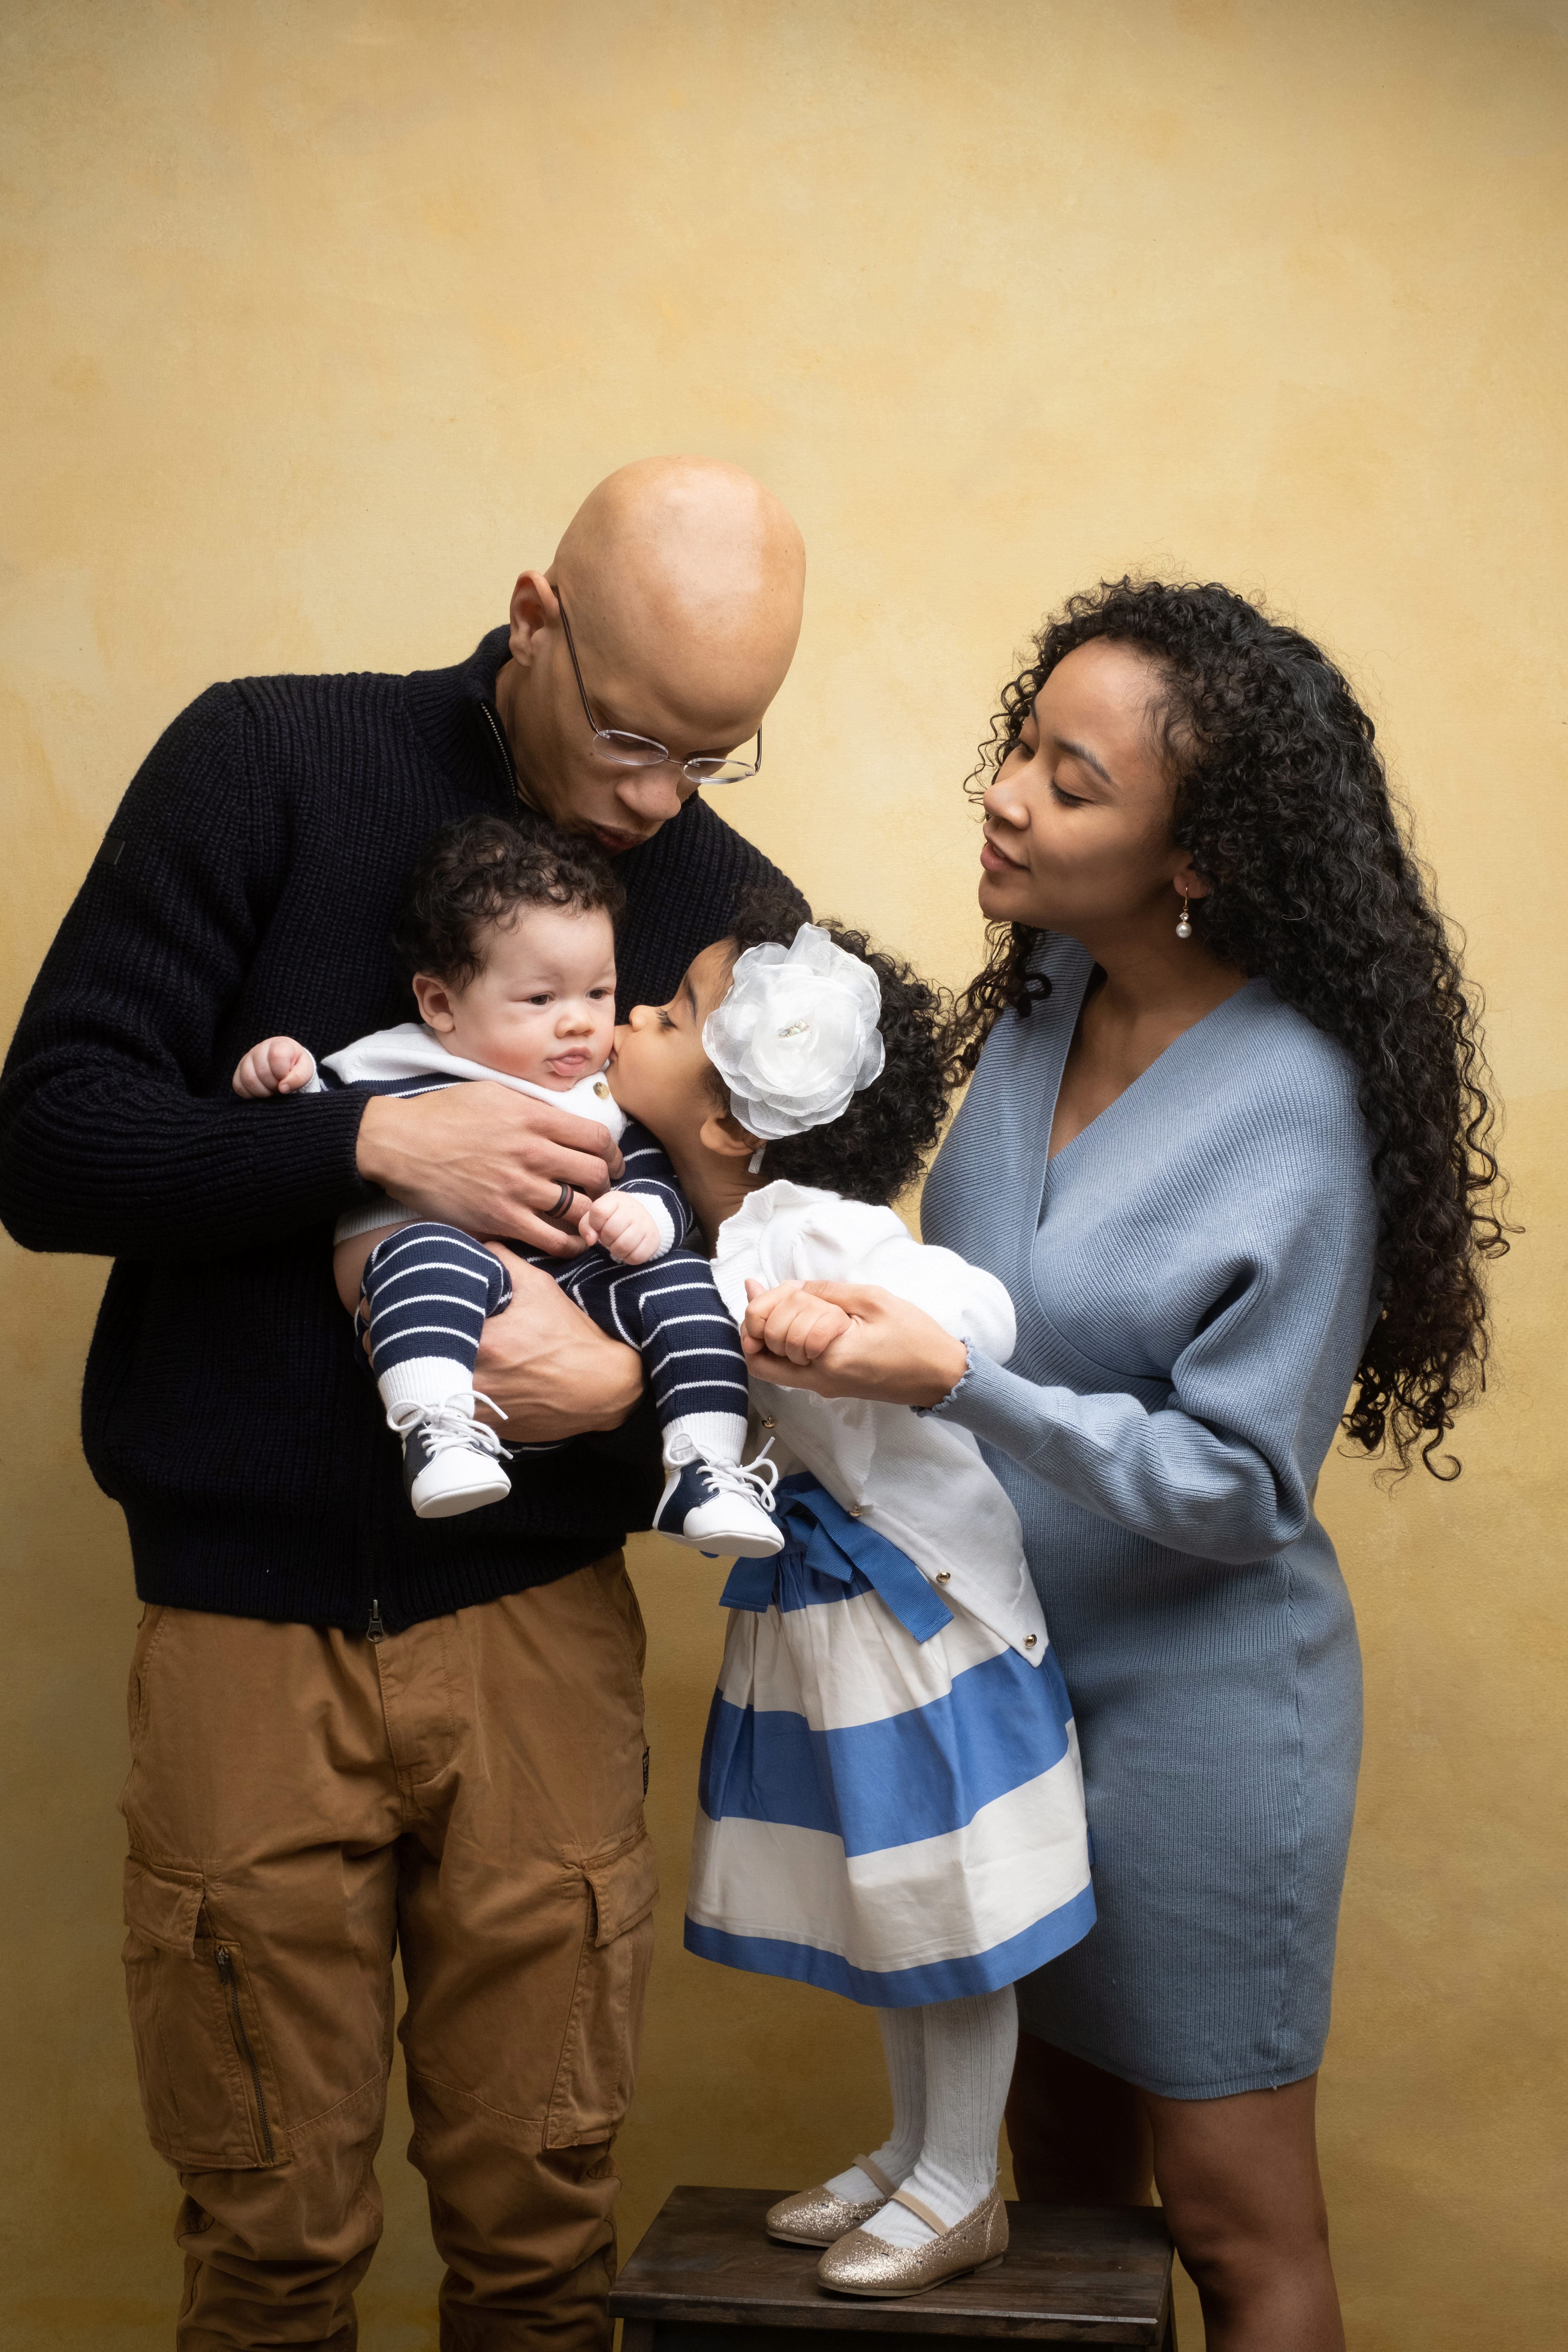 Grant and Family Photo Session at Chicago Baby Studio